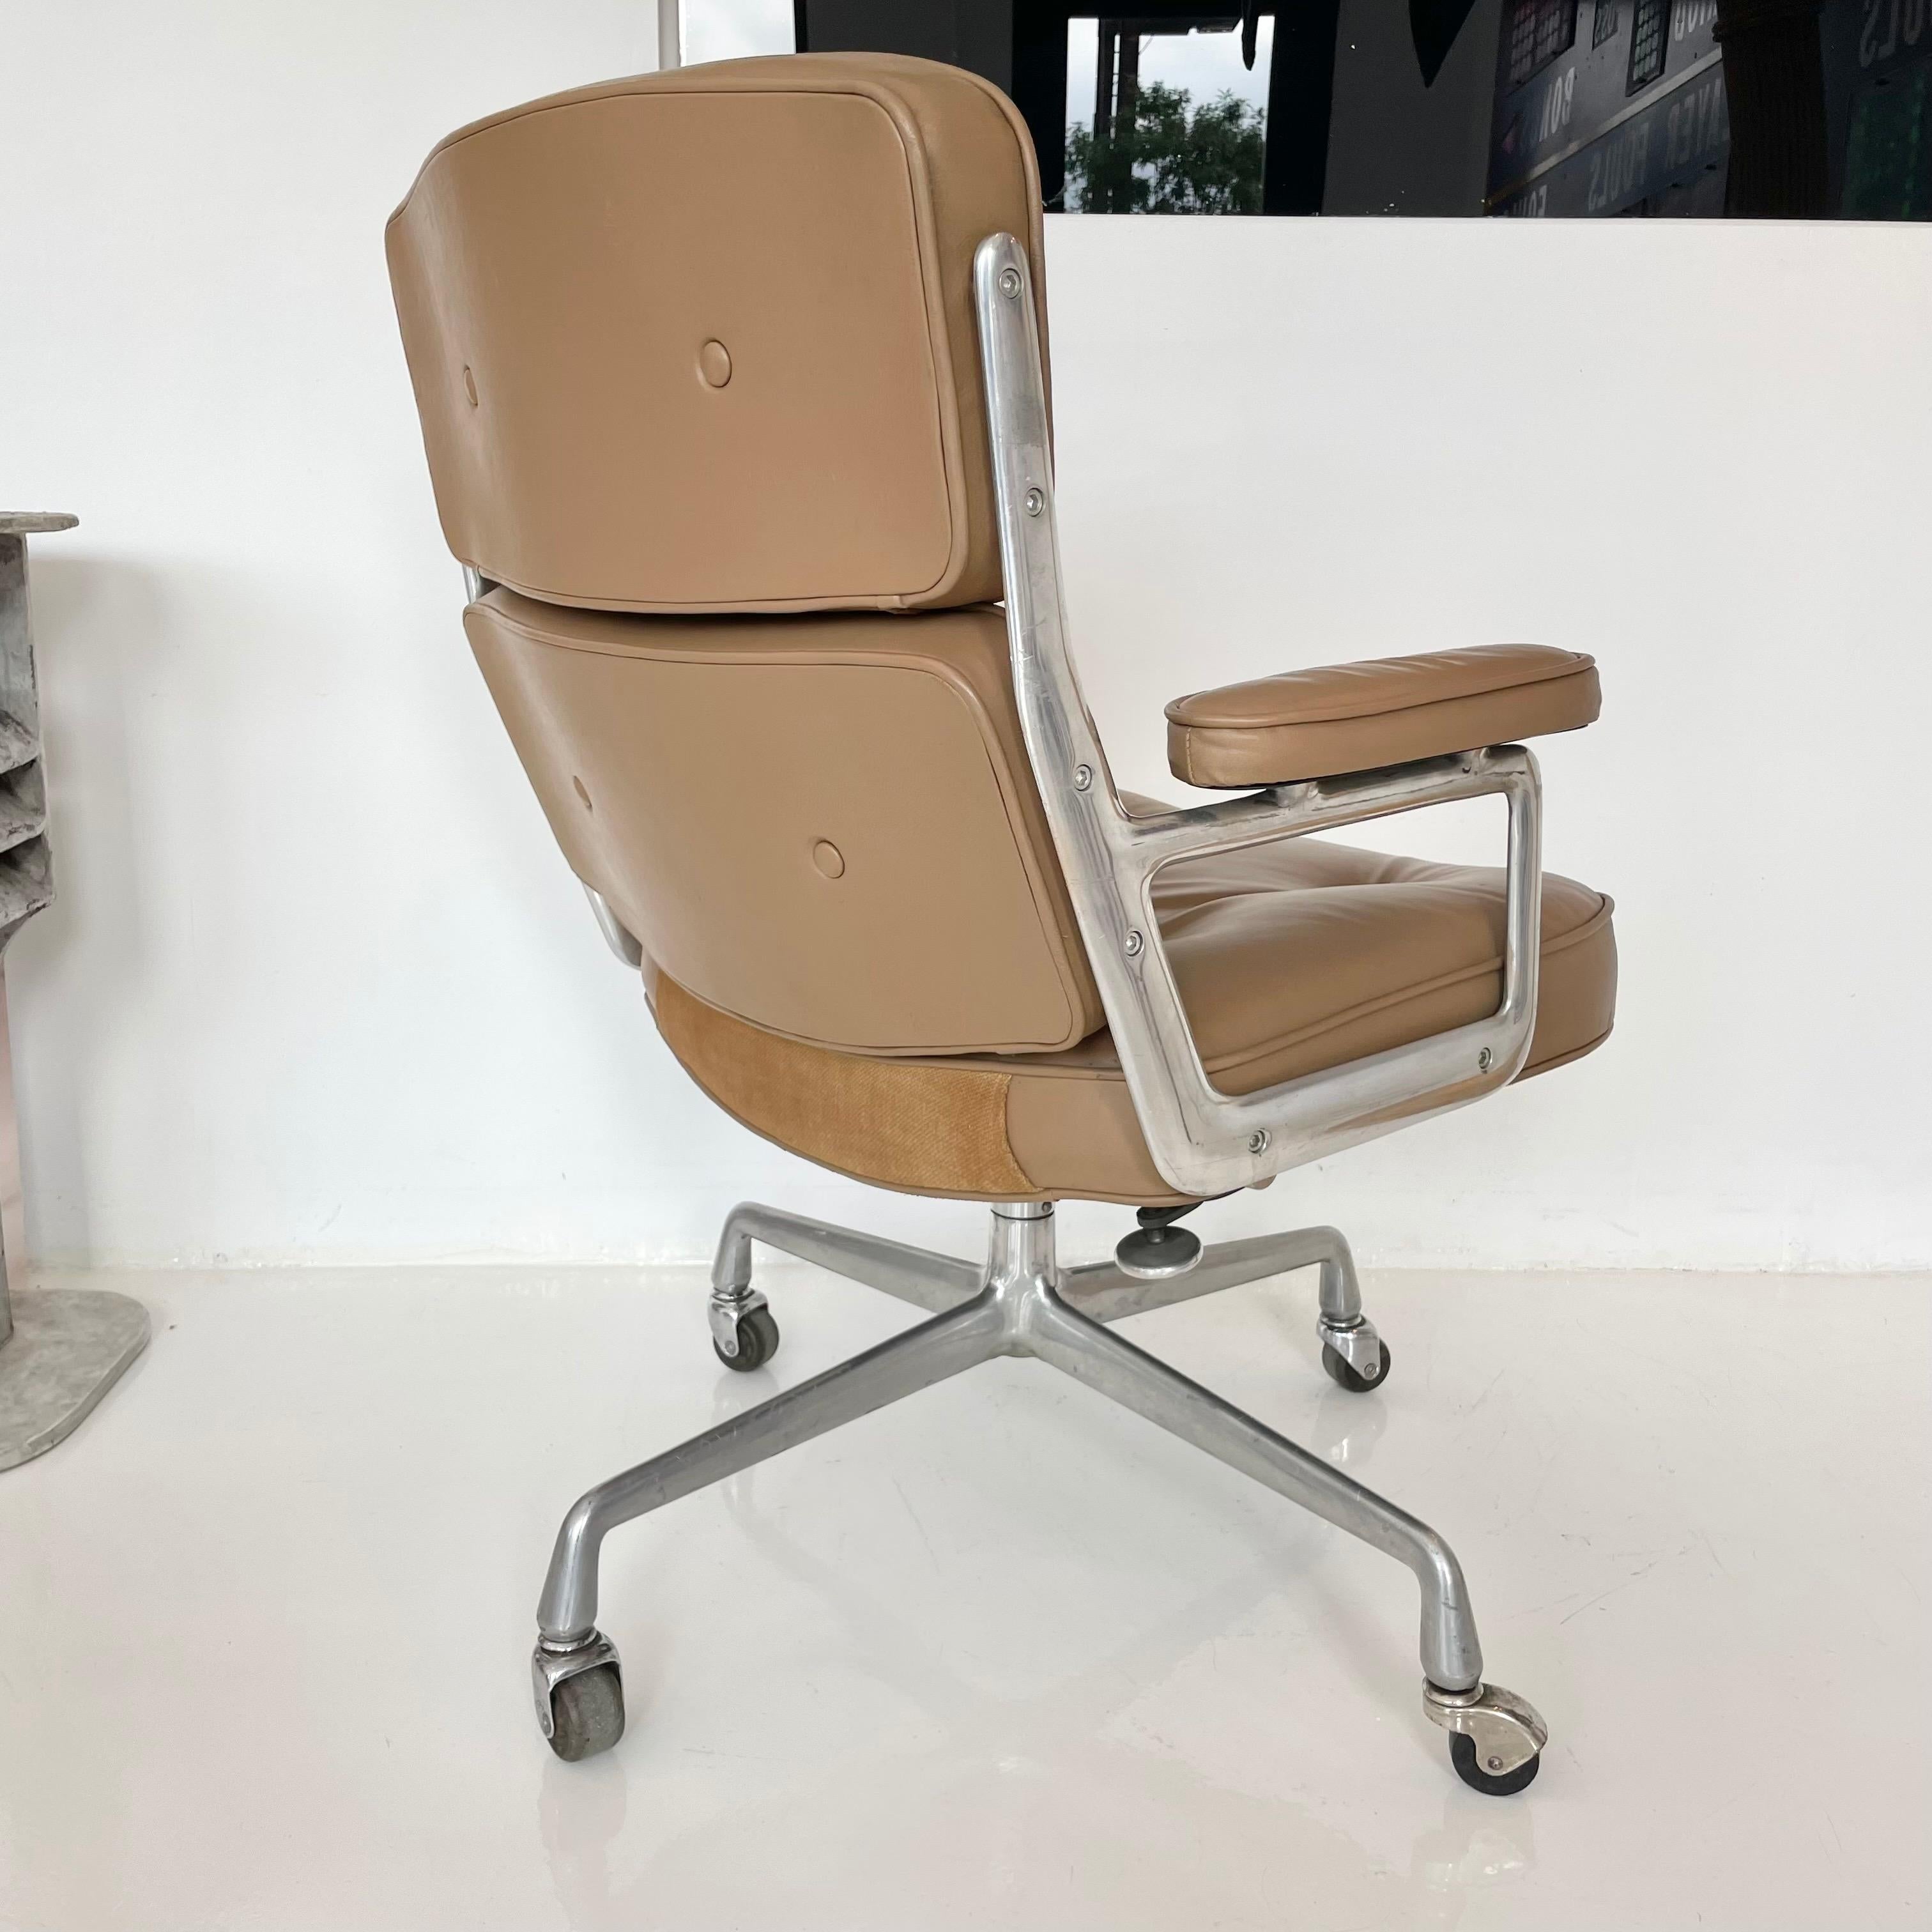 Aluminum Original Eames Time Life Chair in Camel Leather